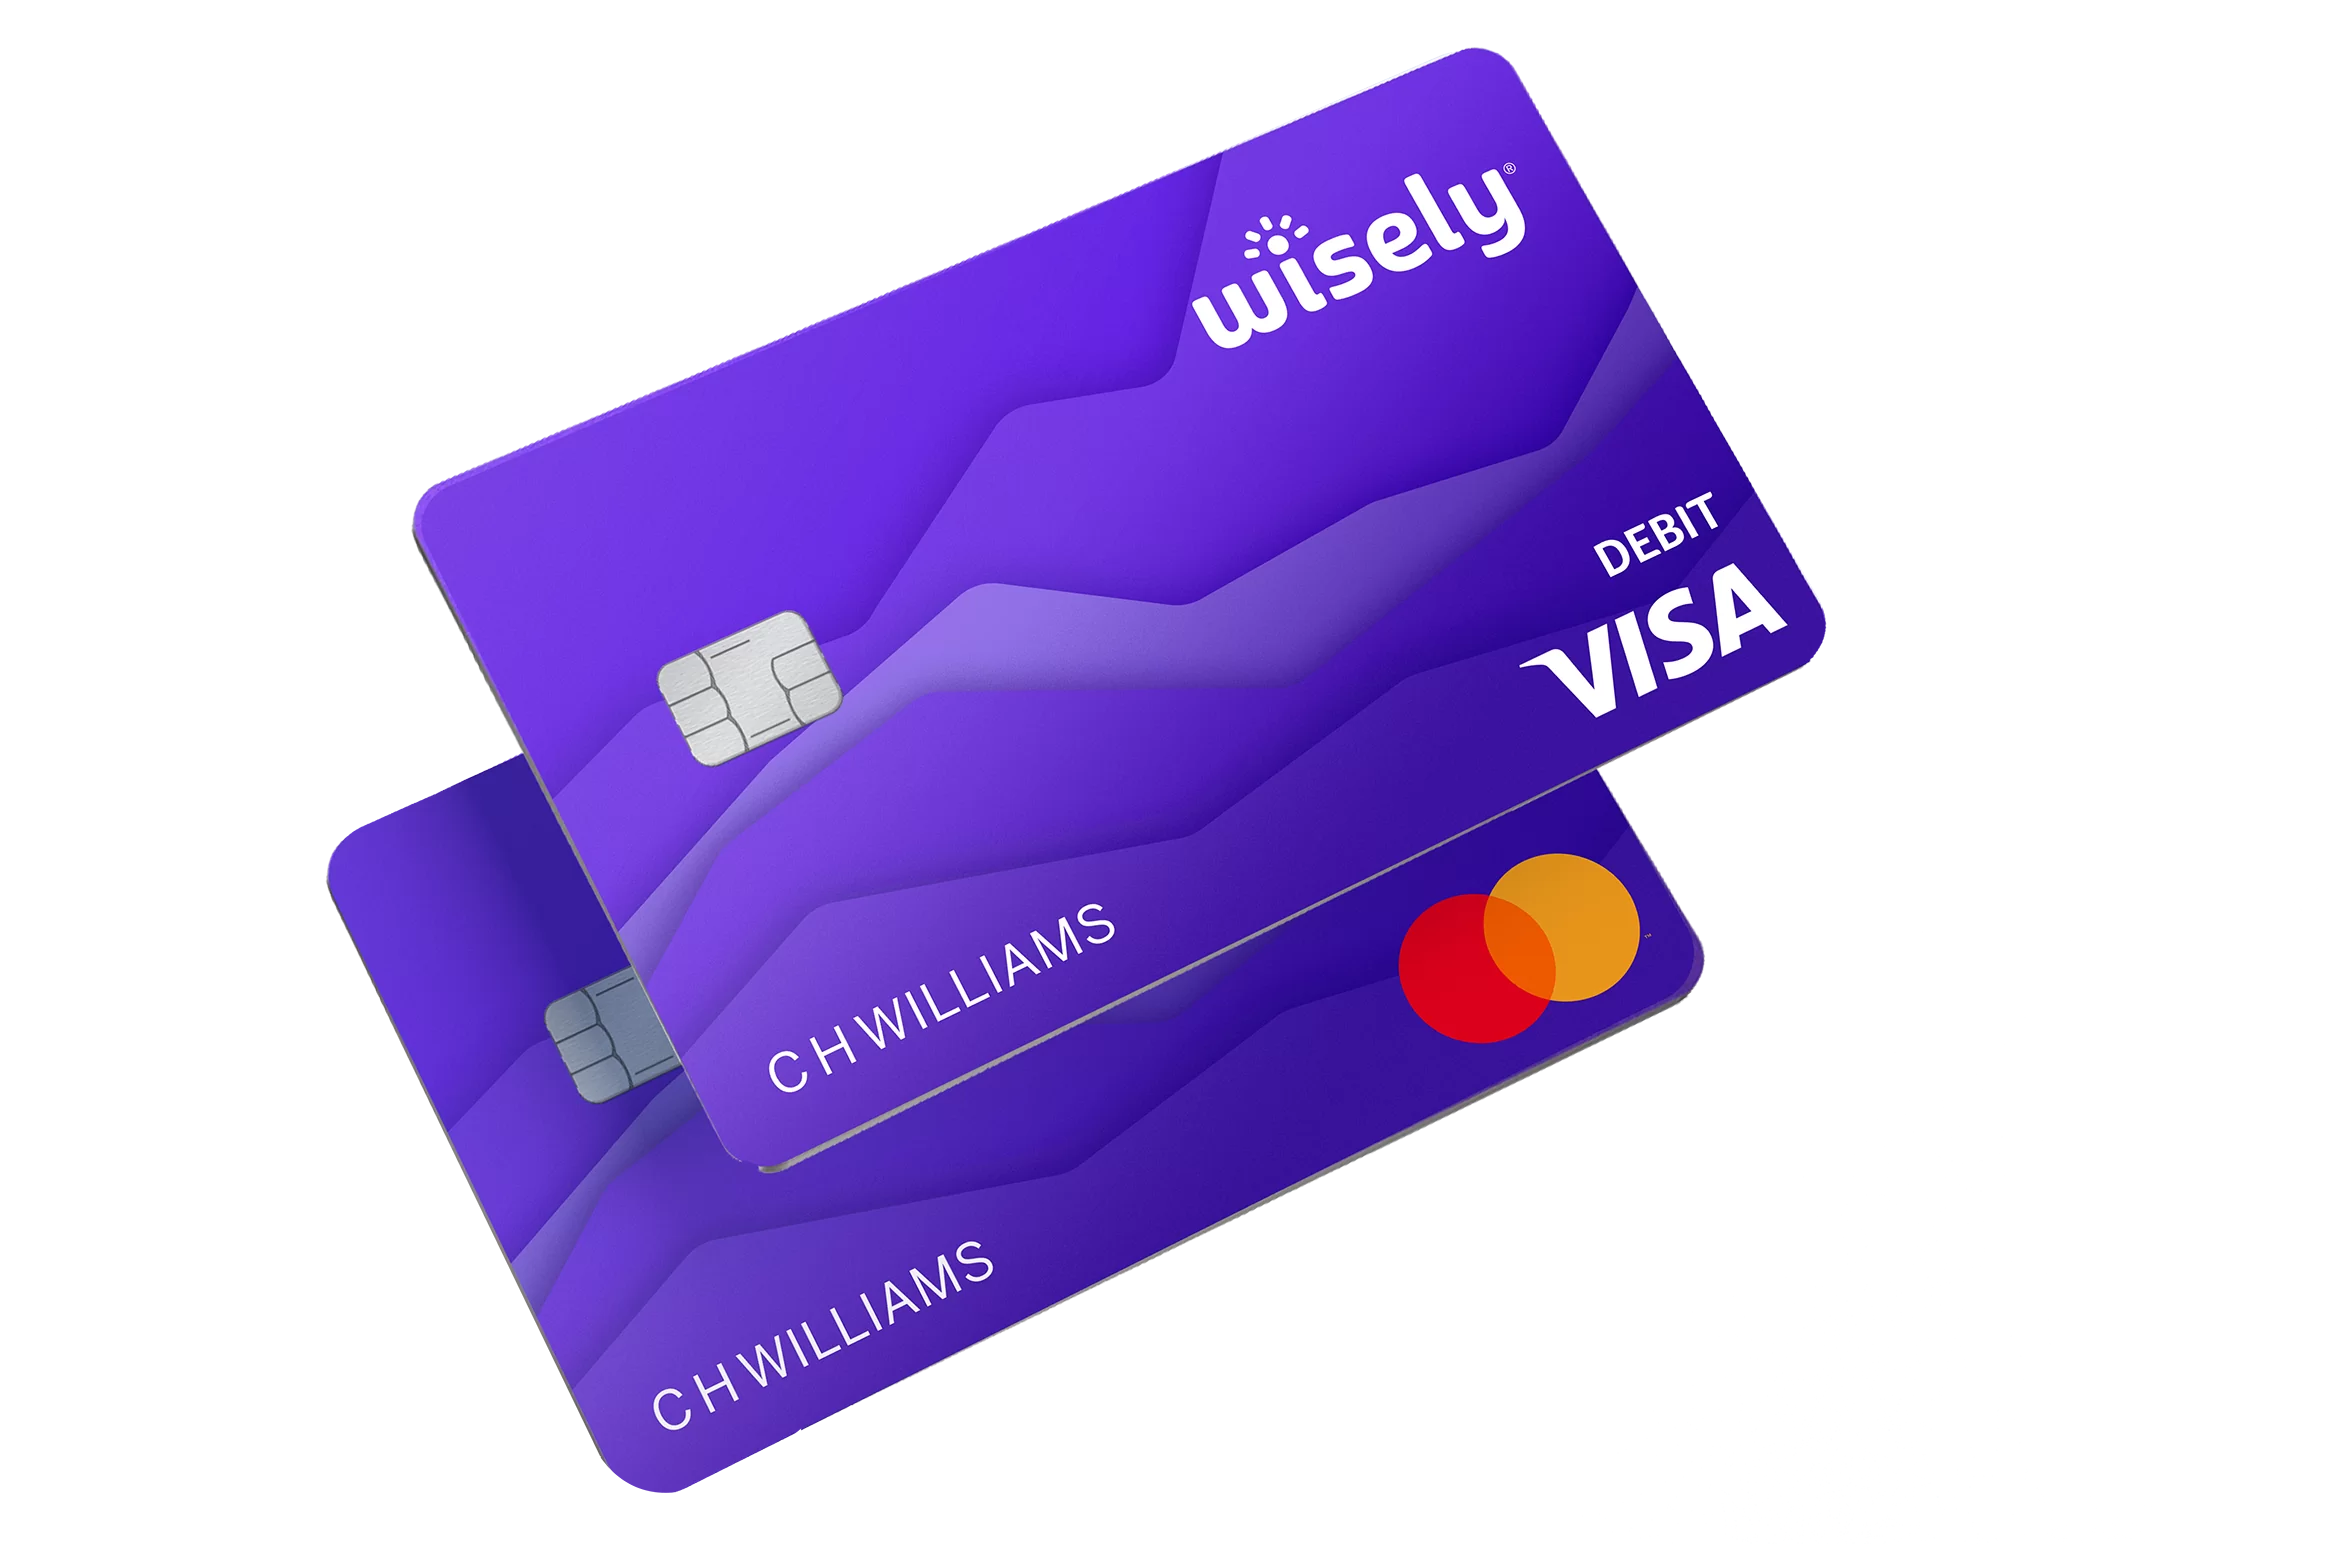 Wisely Mastercard and Visa Cards